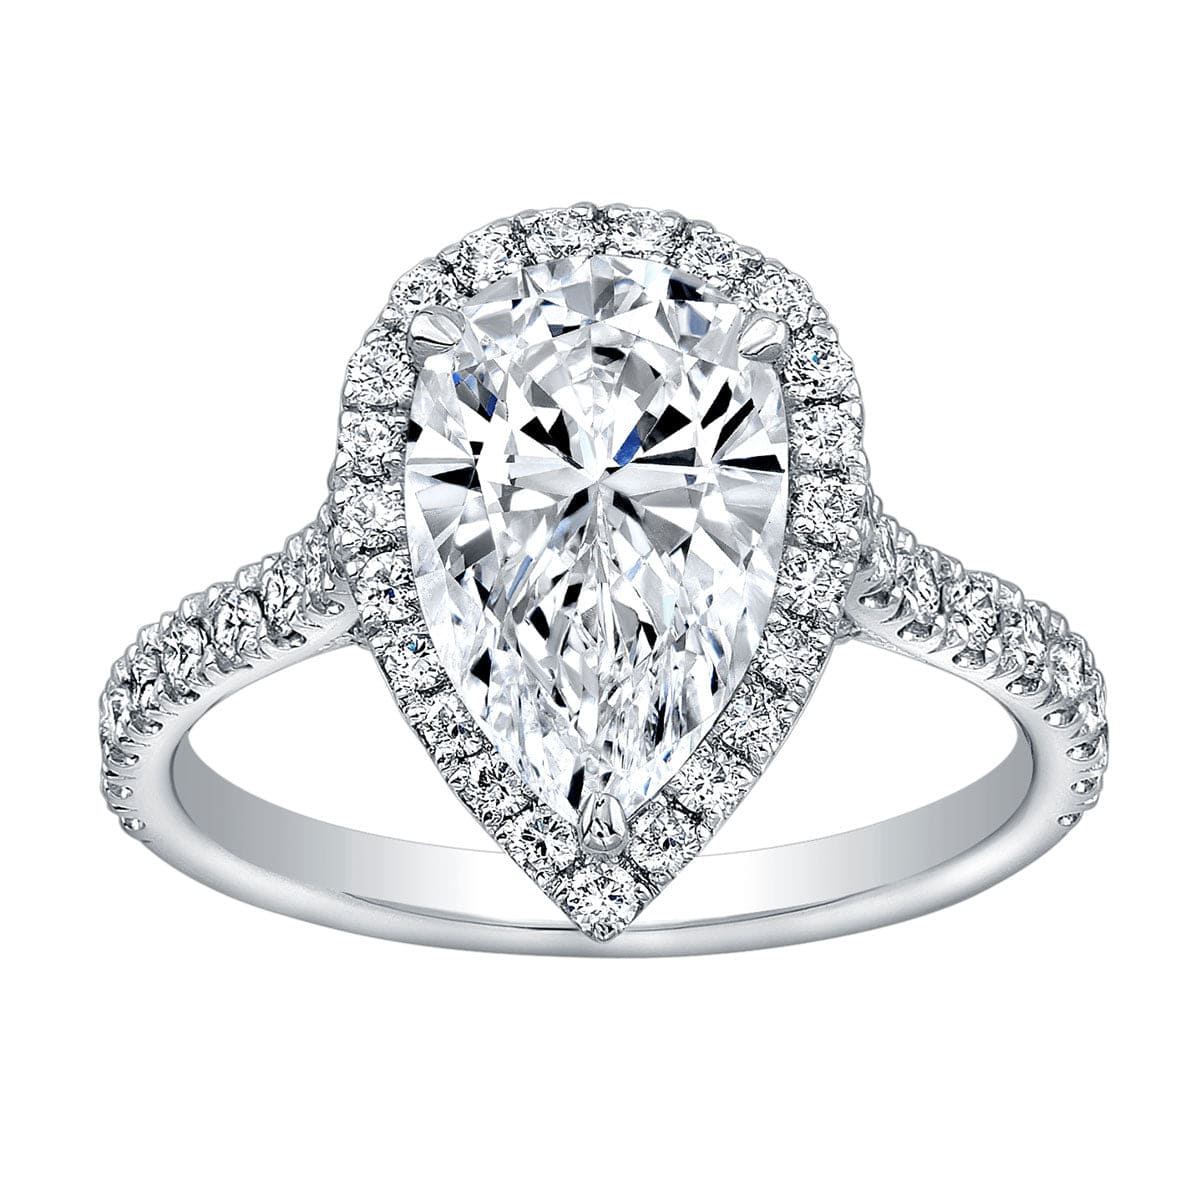 Engagement Rings For $3,000